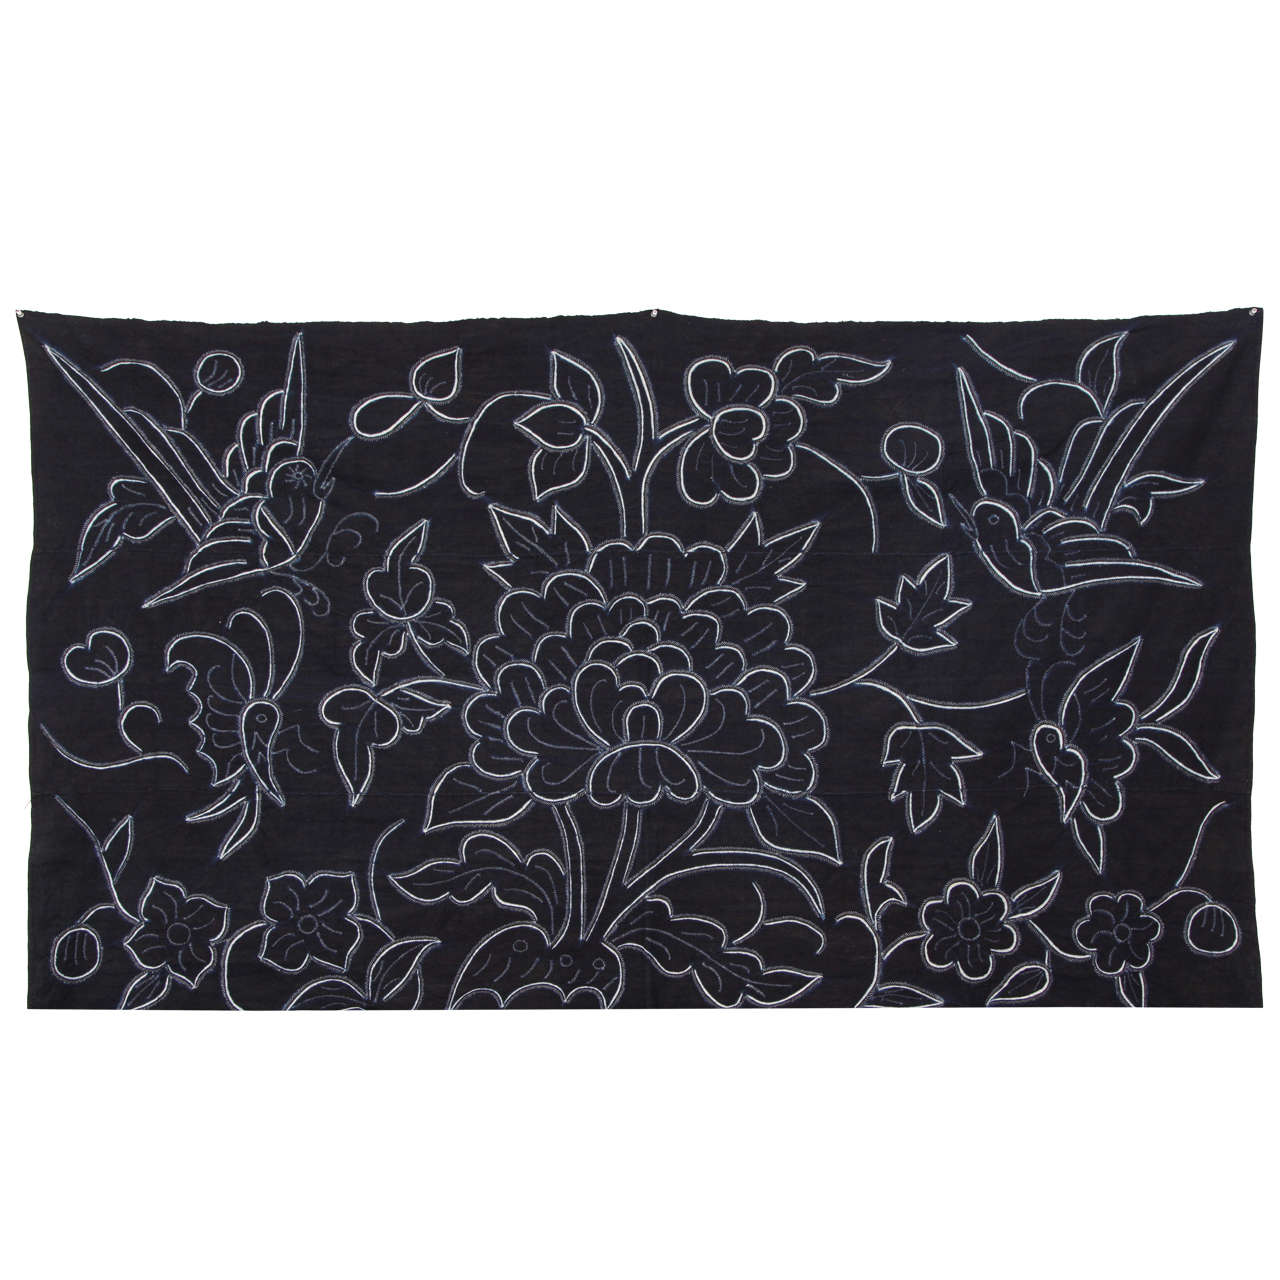 Indigo Textile with Decorative Flowers by Chinese Bouyei People, circa 1980 For Sale